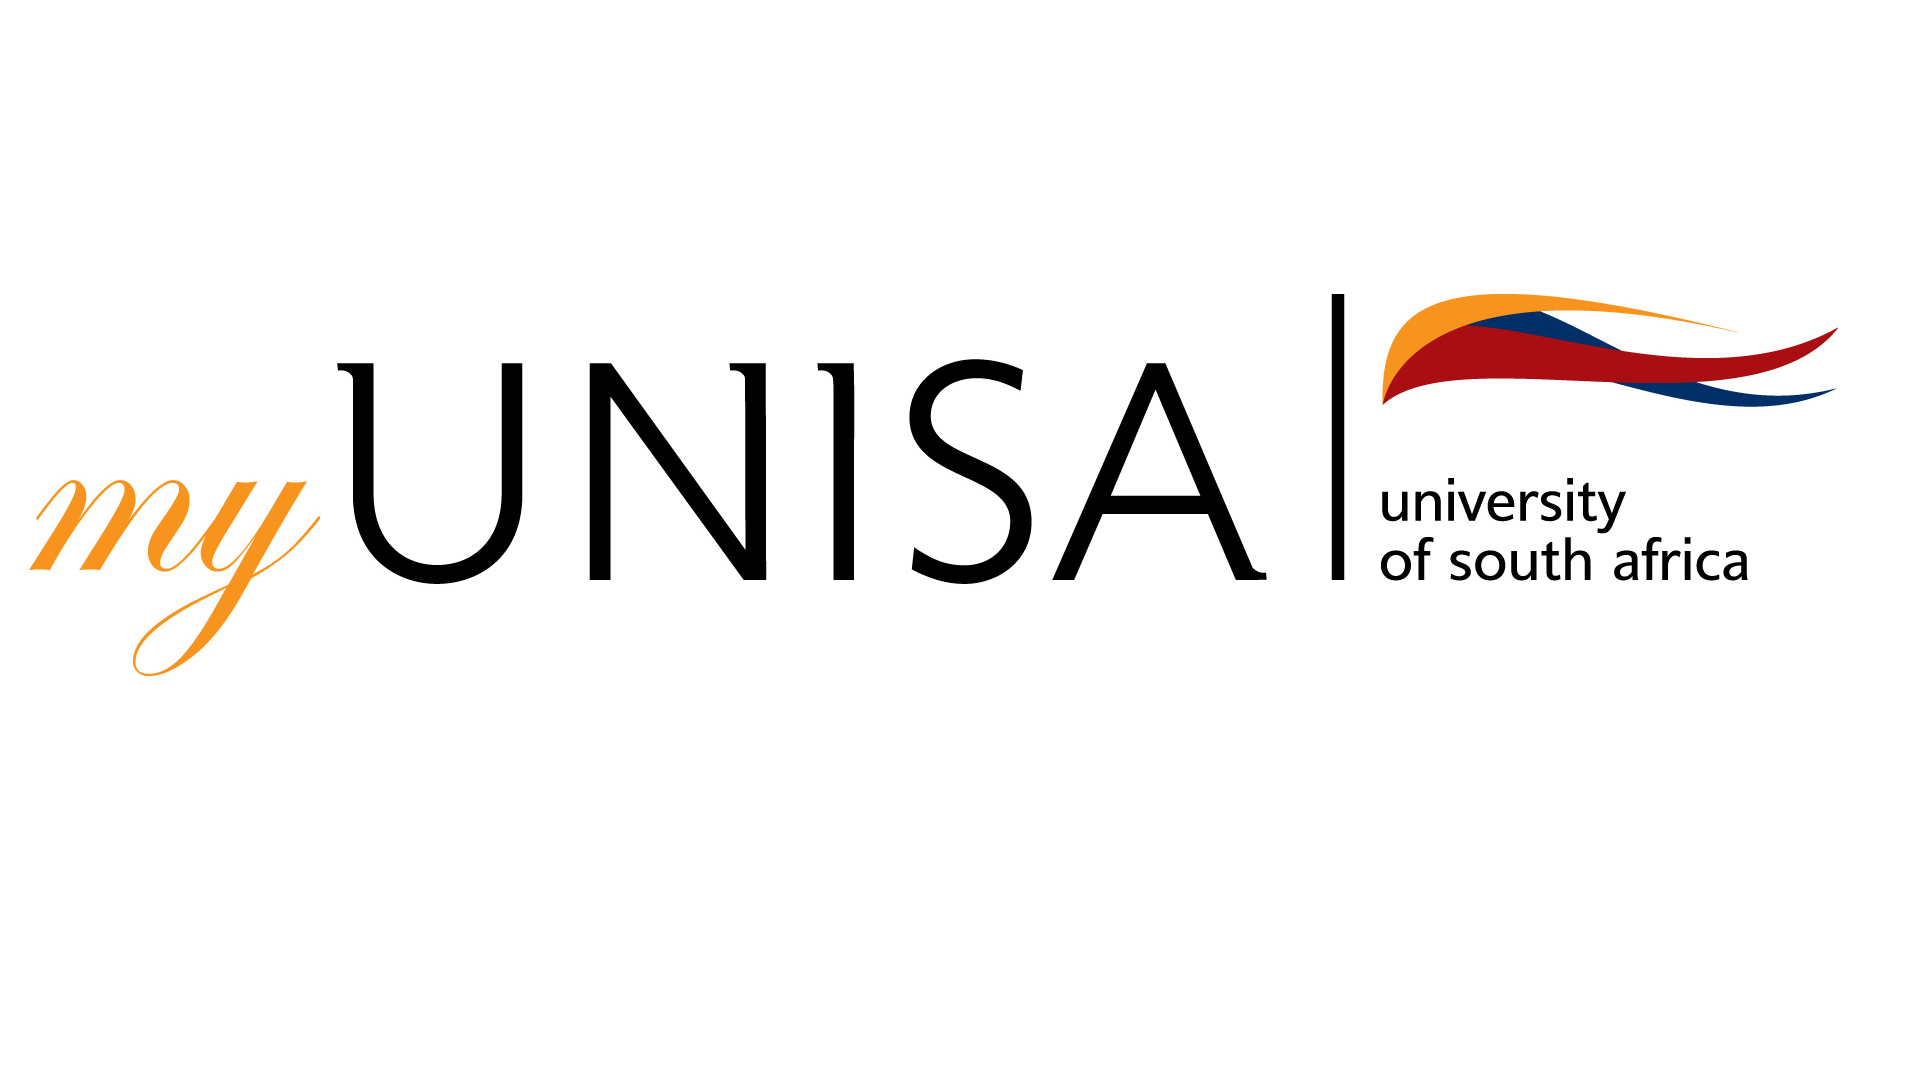 <p>Unisa launches an online portal called myUnisa, which is designed to facilitate the studies and study-related communications of Unisa students worldwide — another exciting step in Unisa’s transformation into an online university.</p>